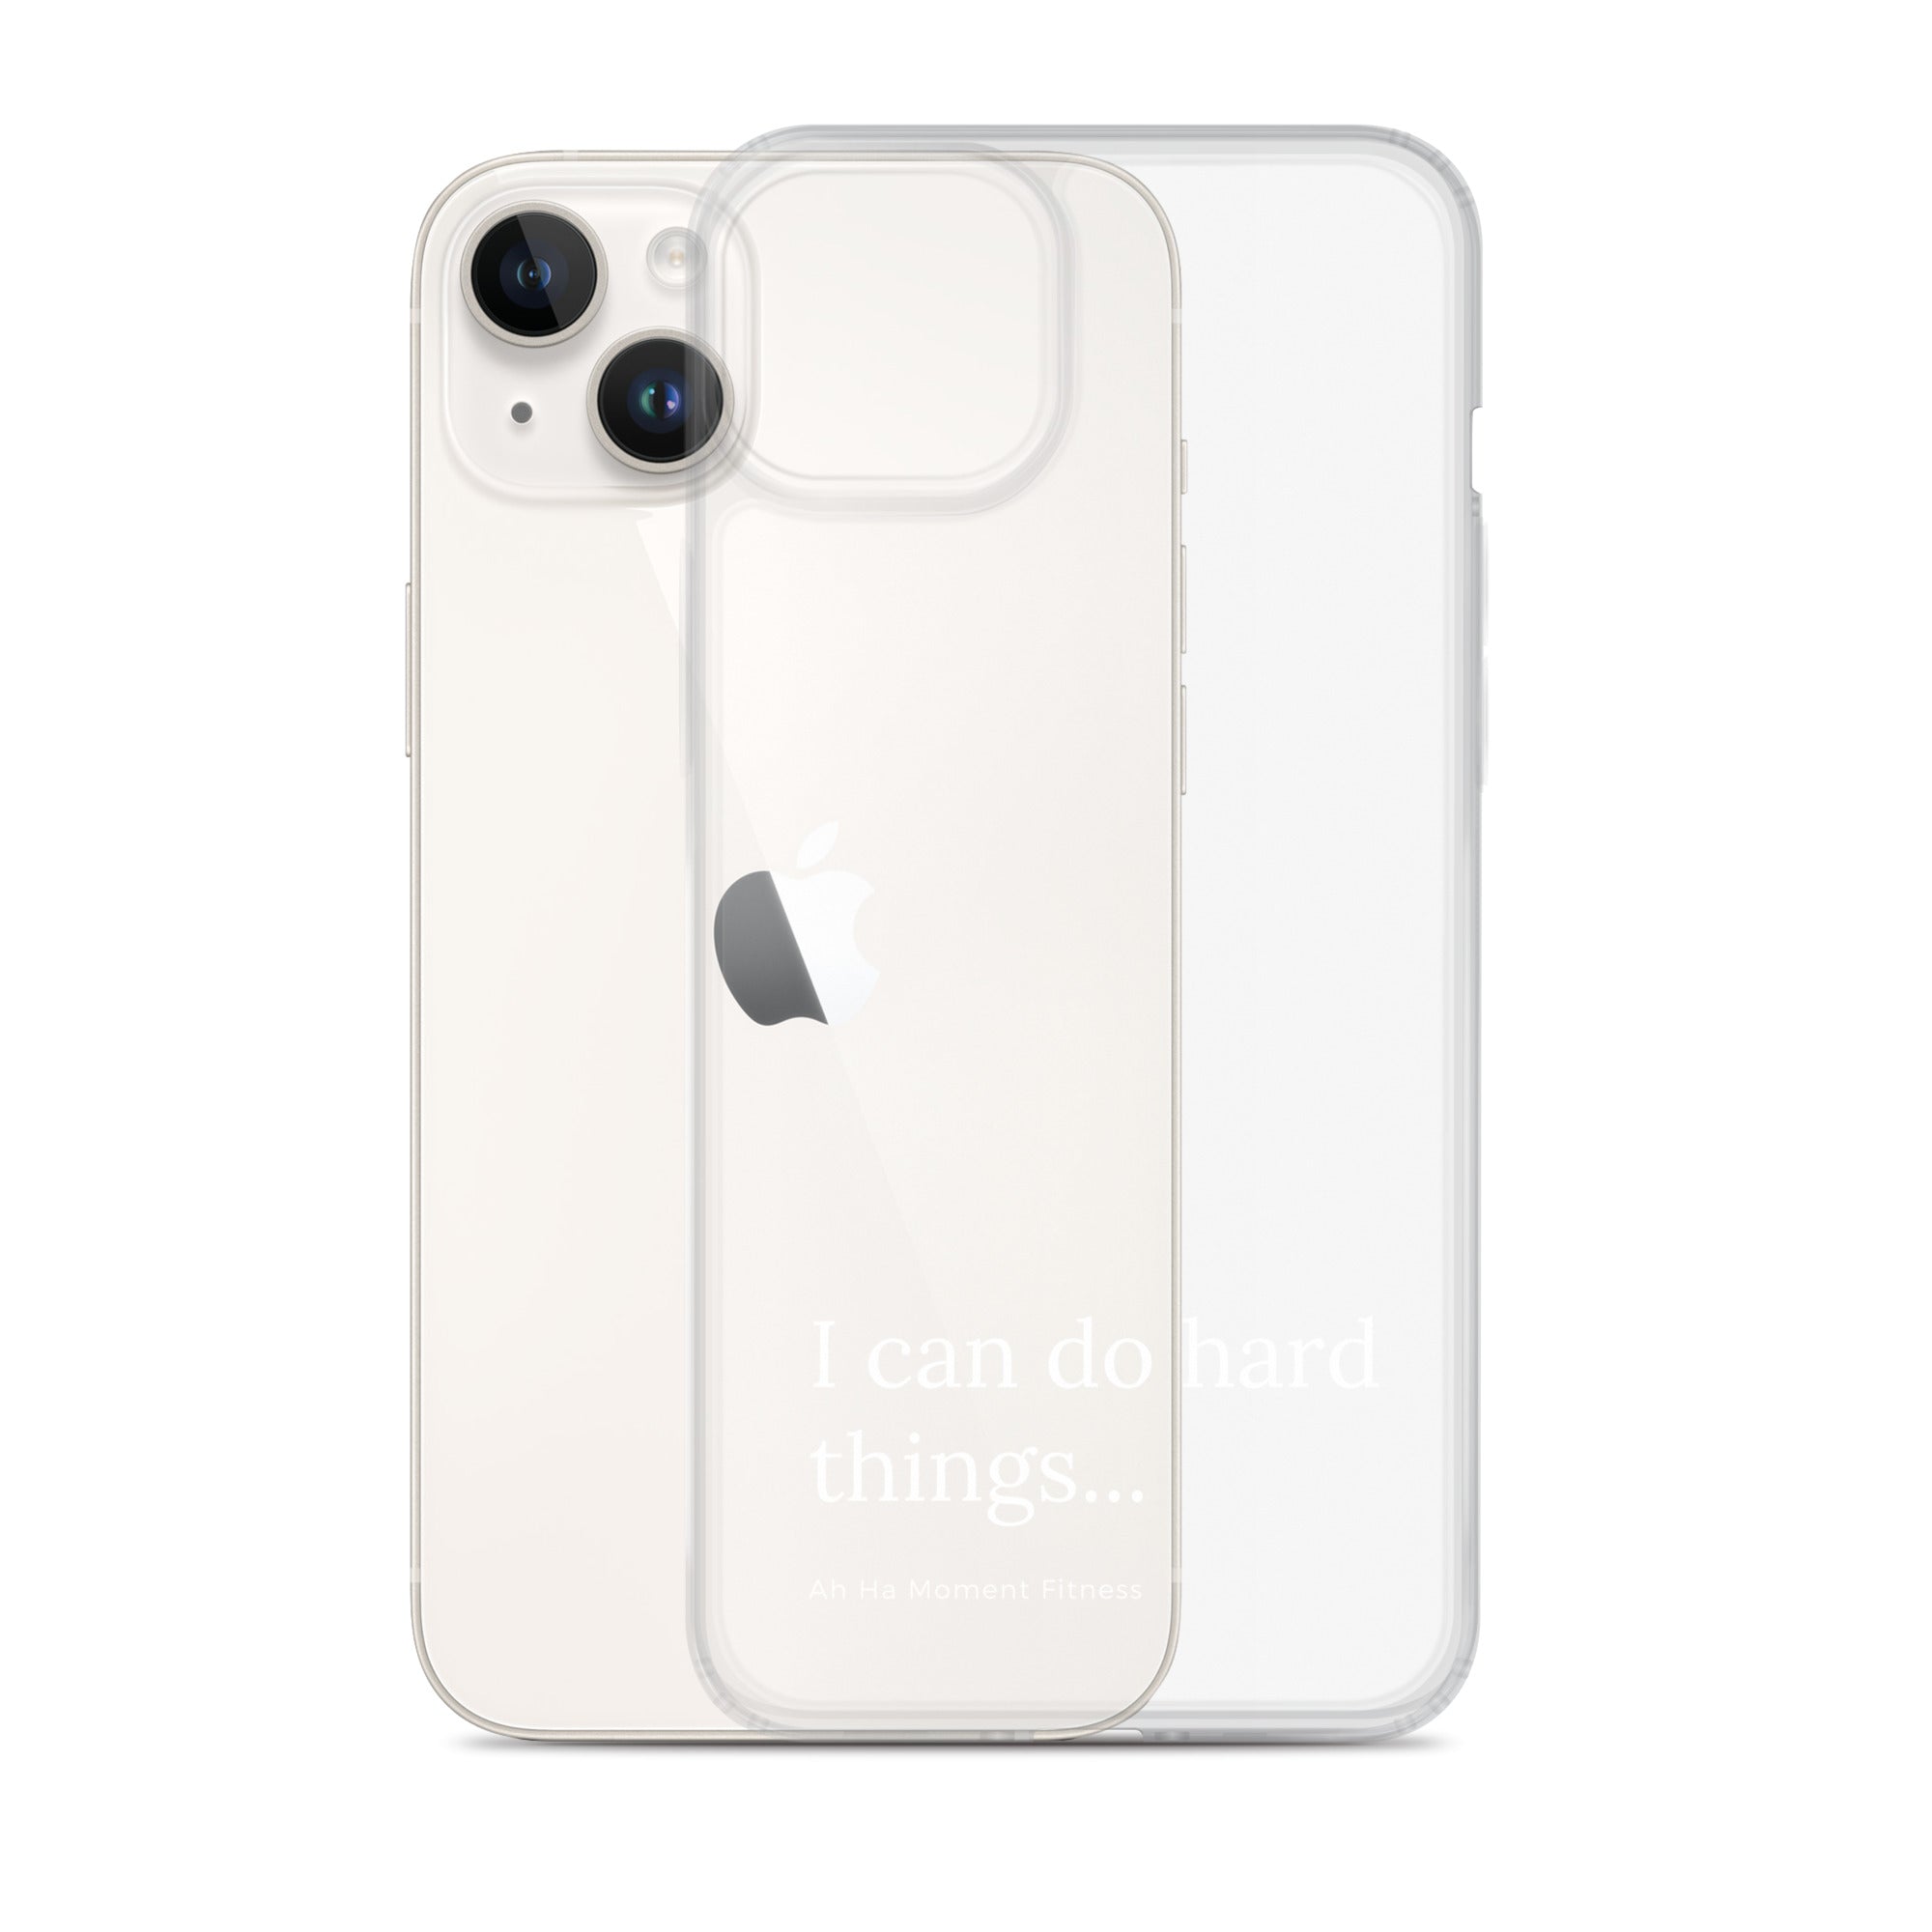 Clear Case for iPhone® - Hard Things Small Font